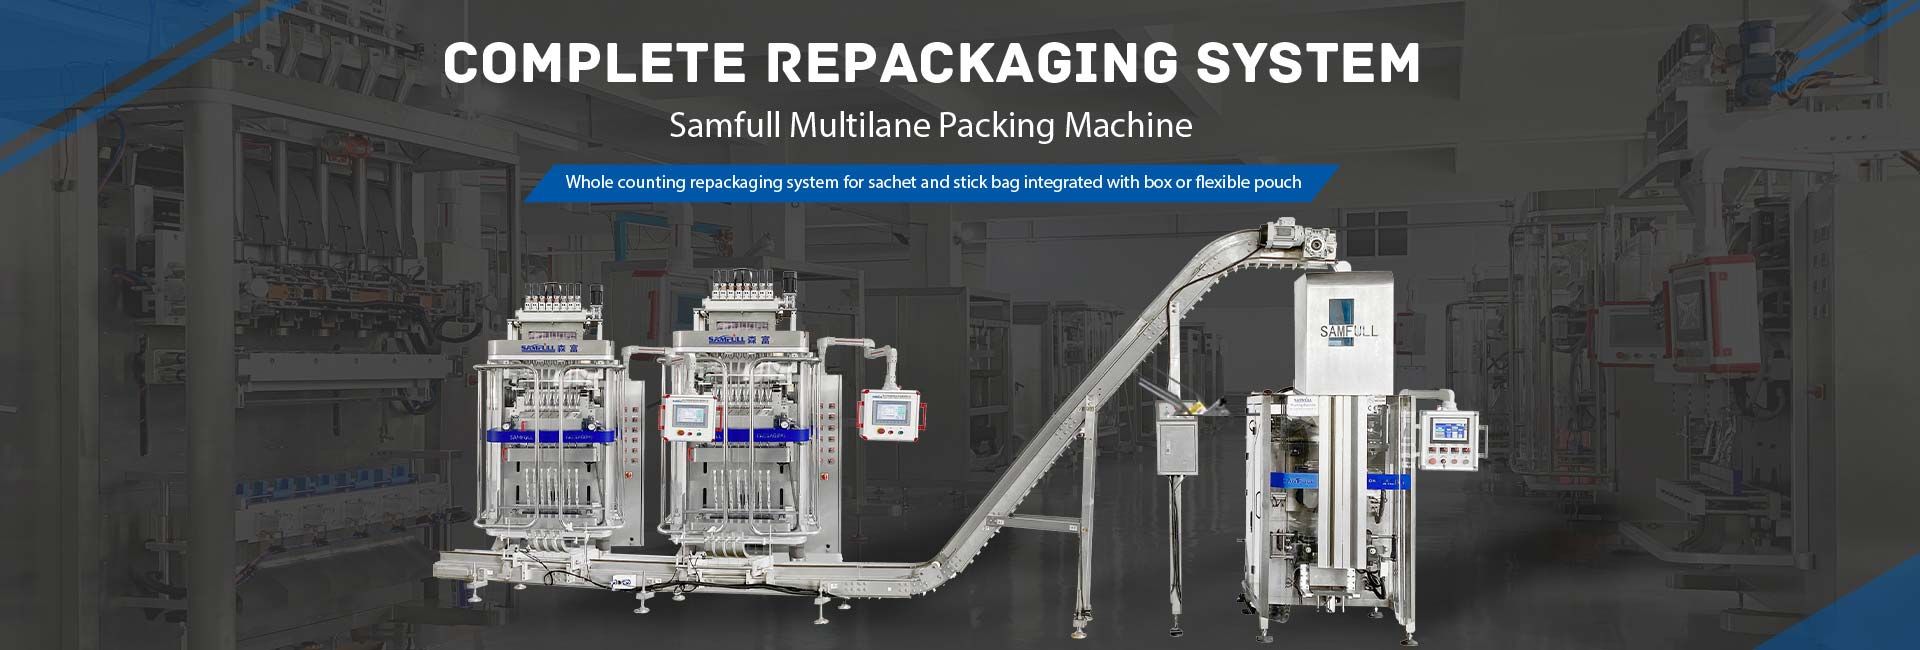 Complete Repackaging System